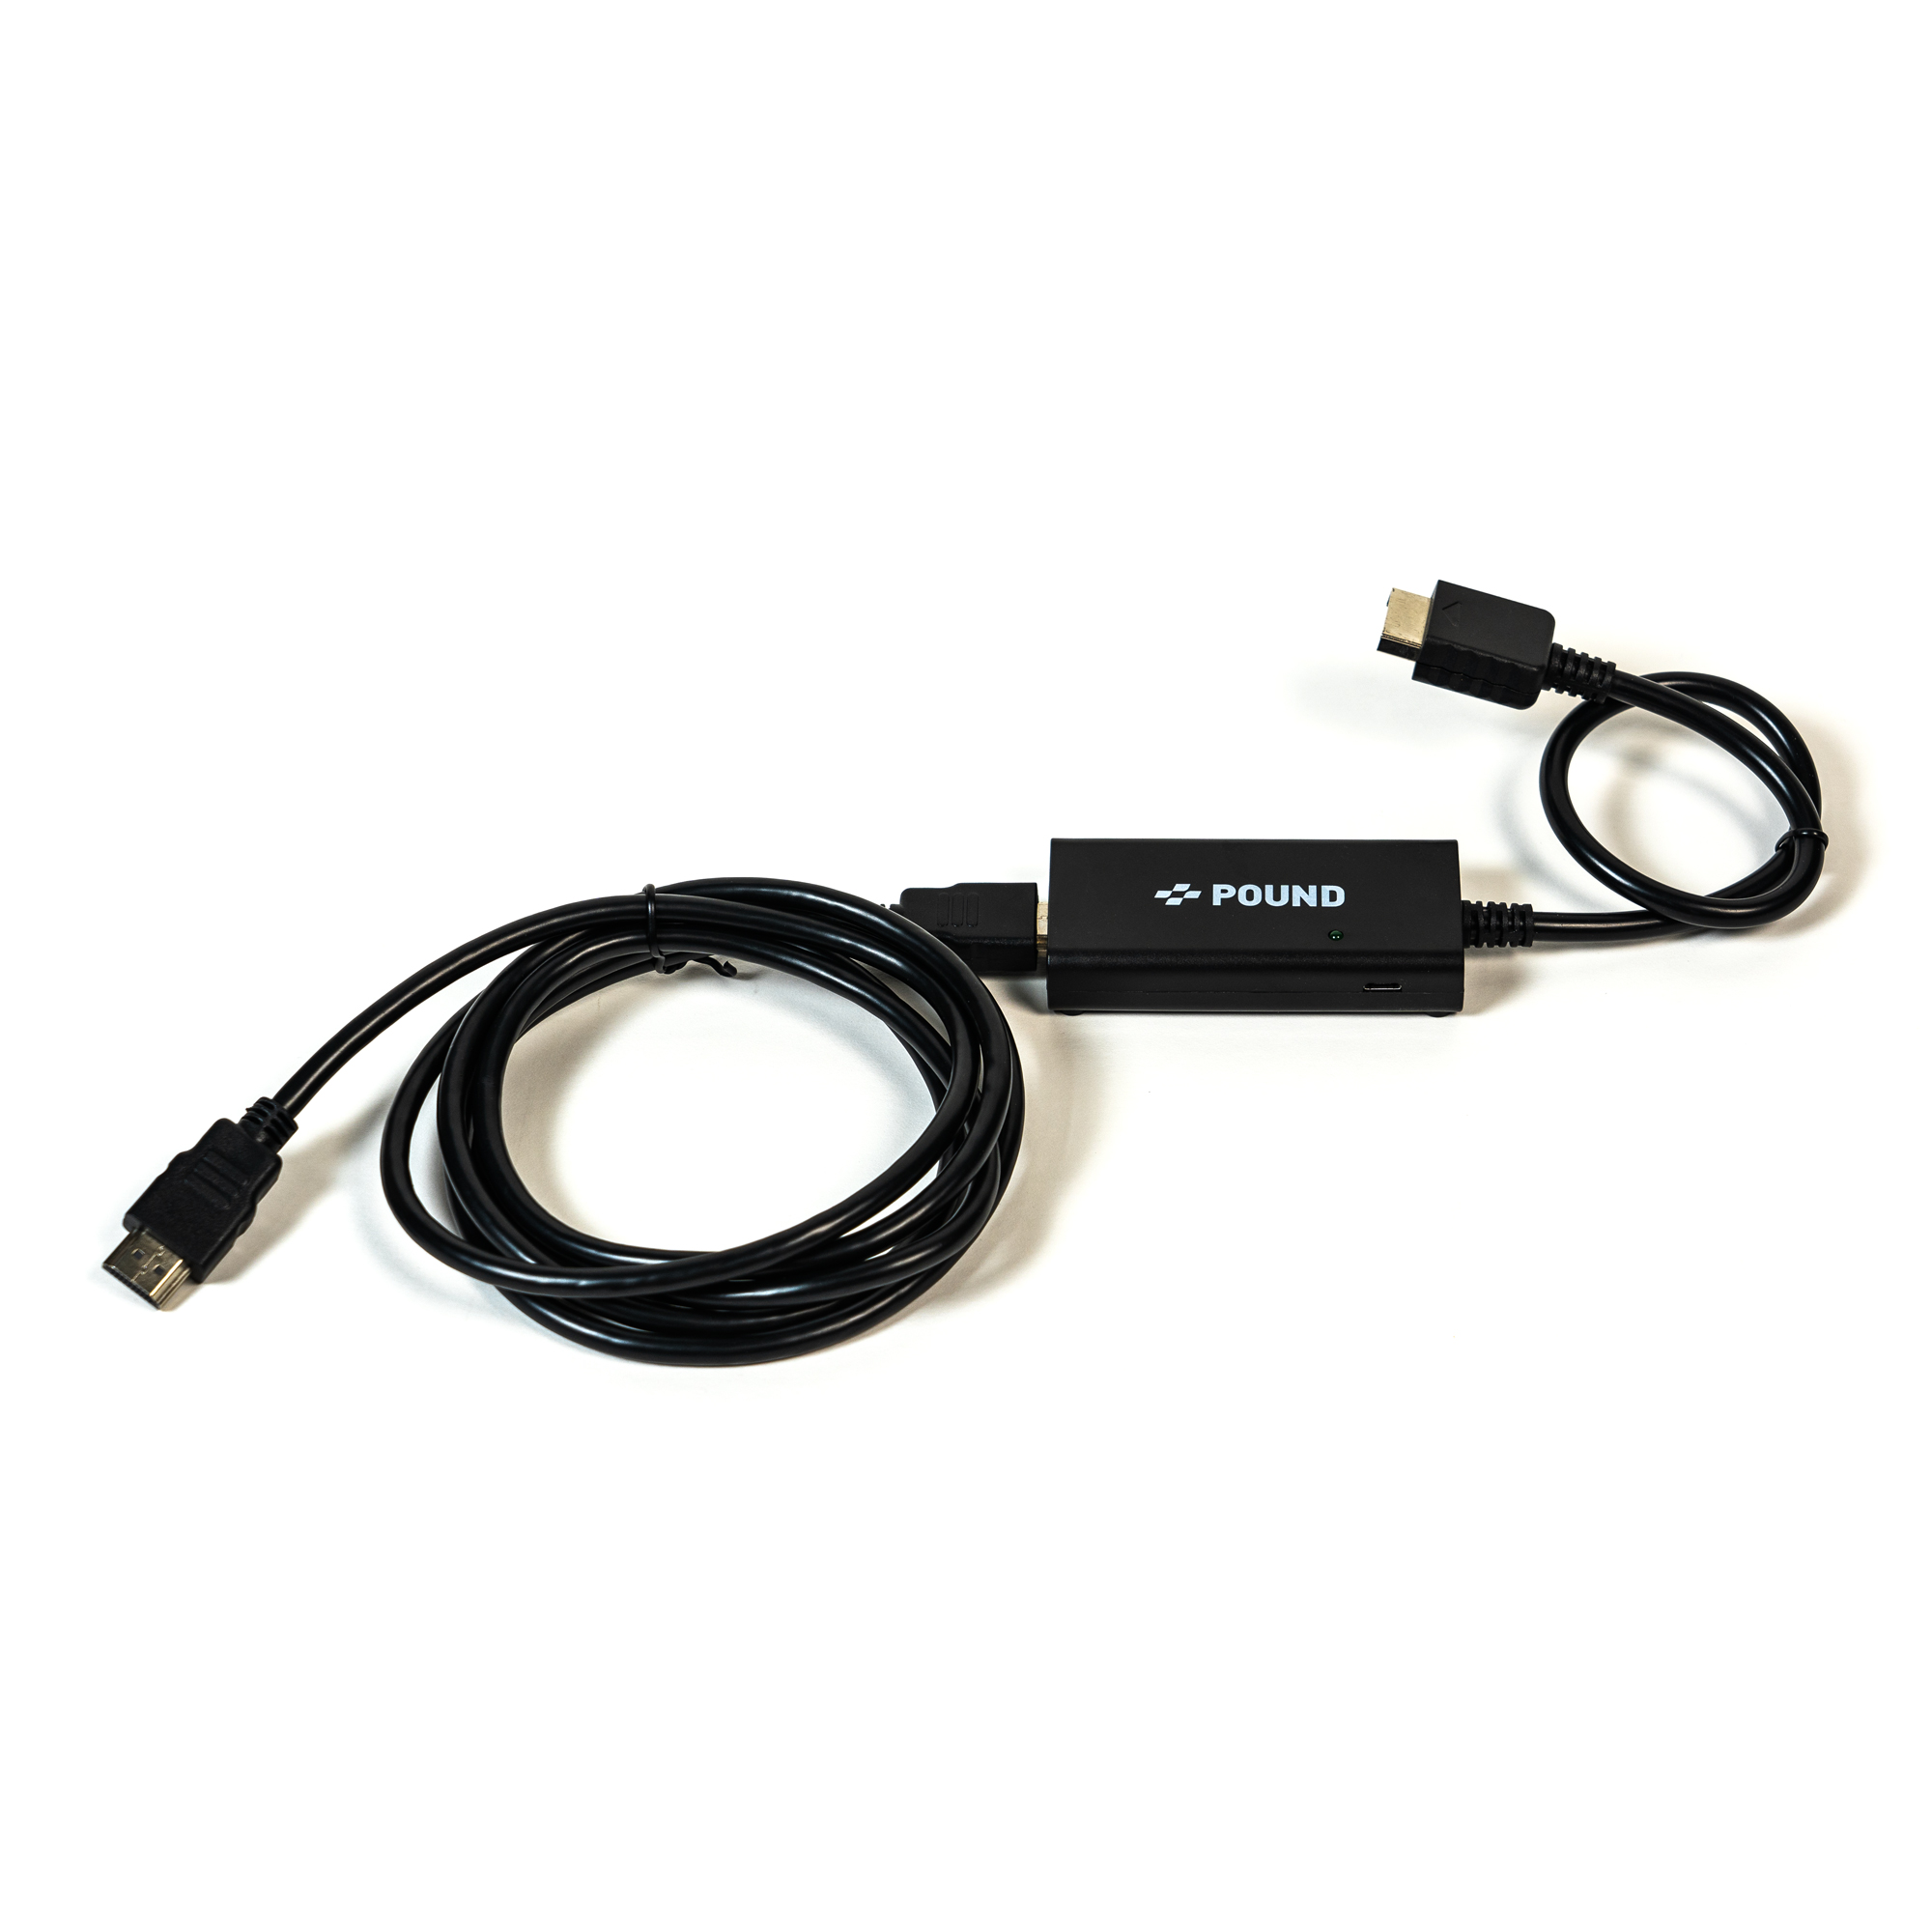 POUND TECHNOLOGY - HD Link Cable For Playstation 2 - HD Links For Consoles | Pound Technology